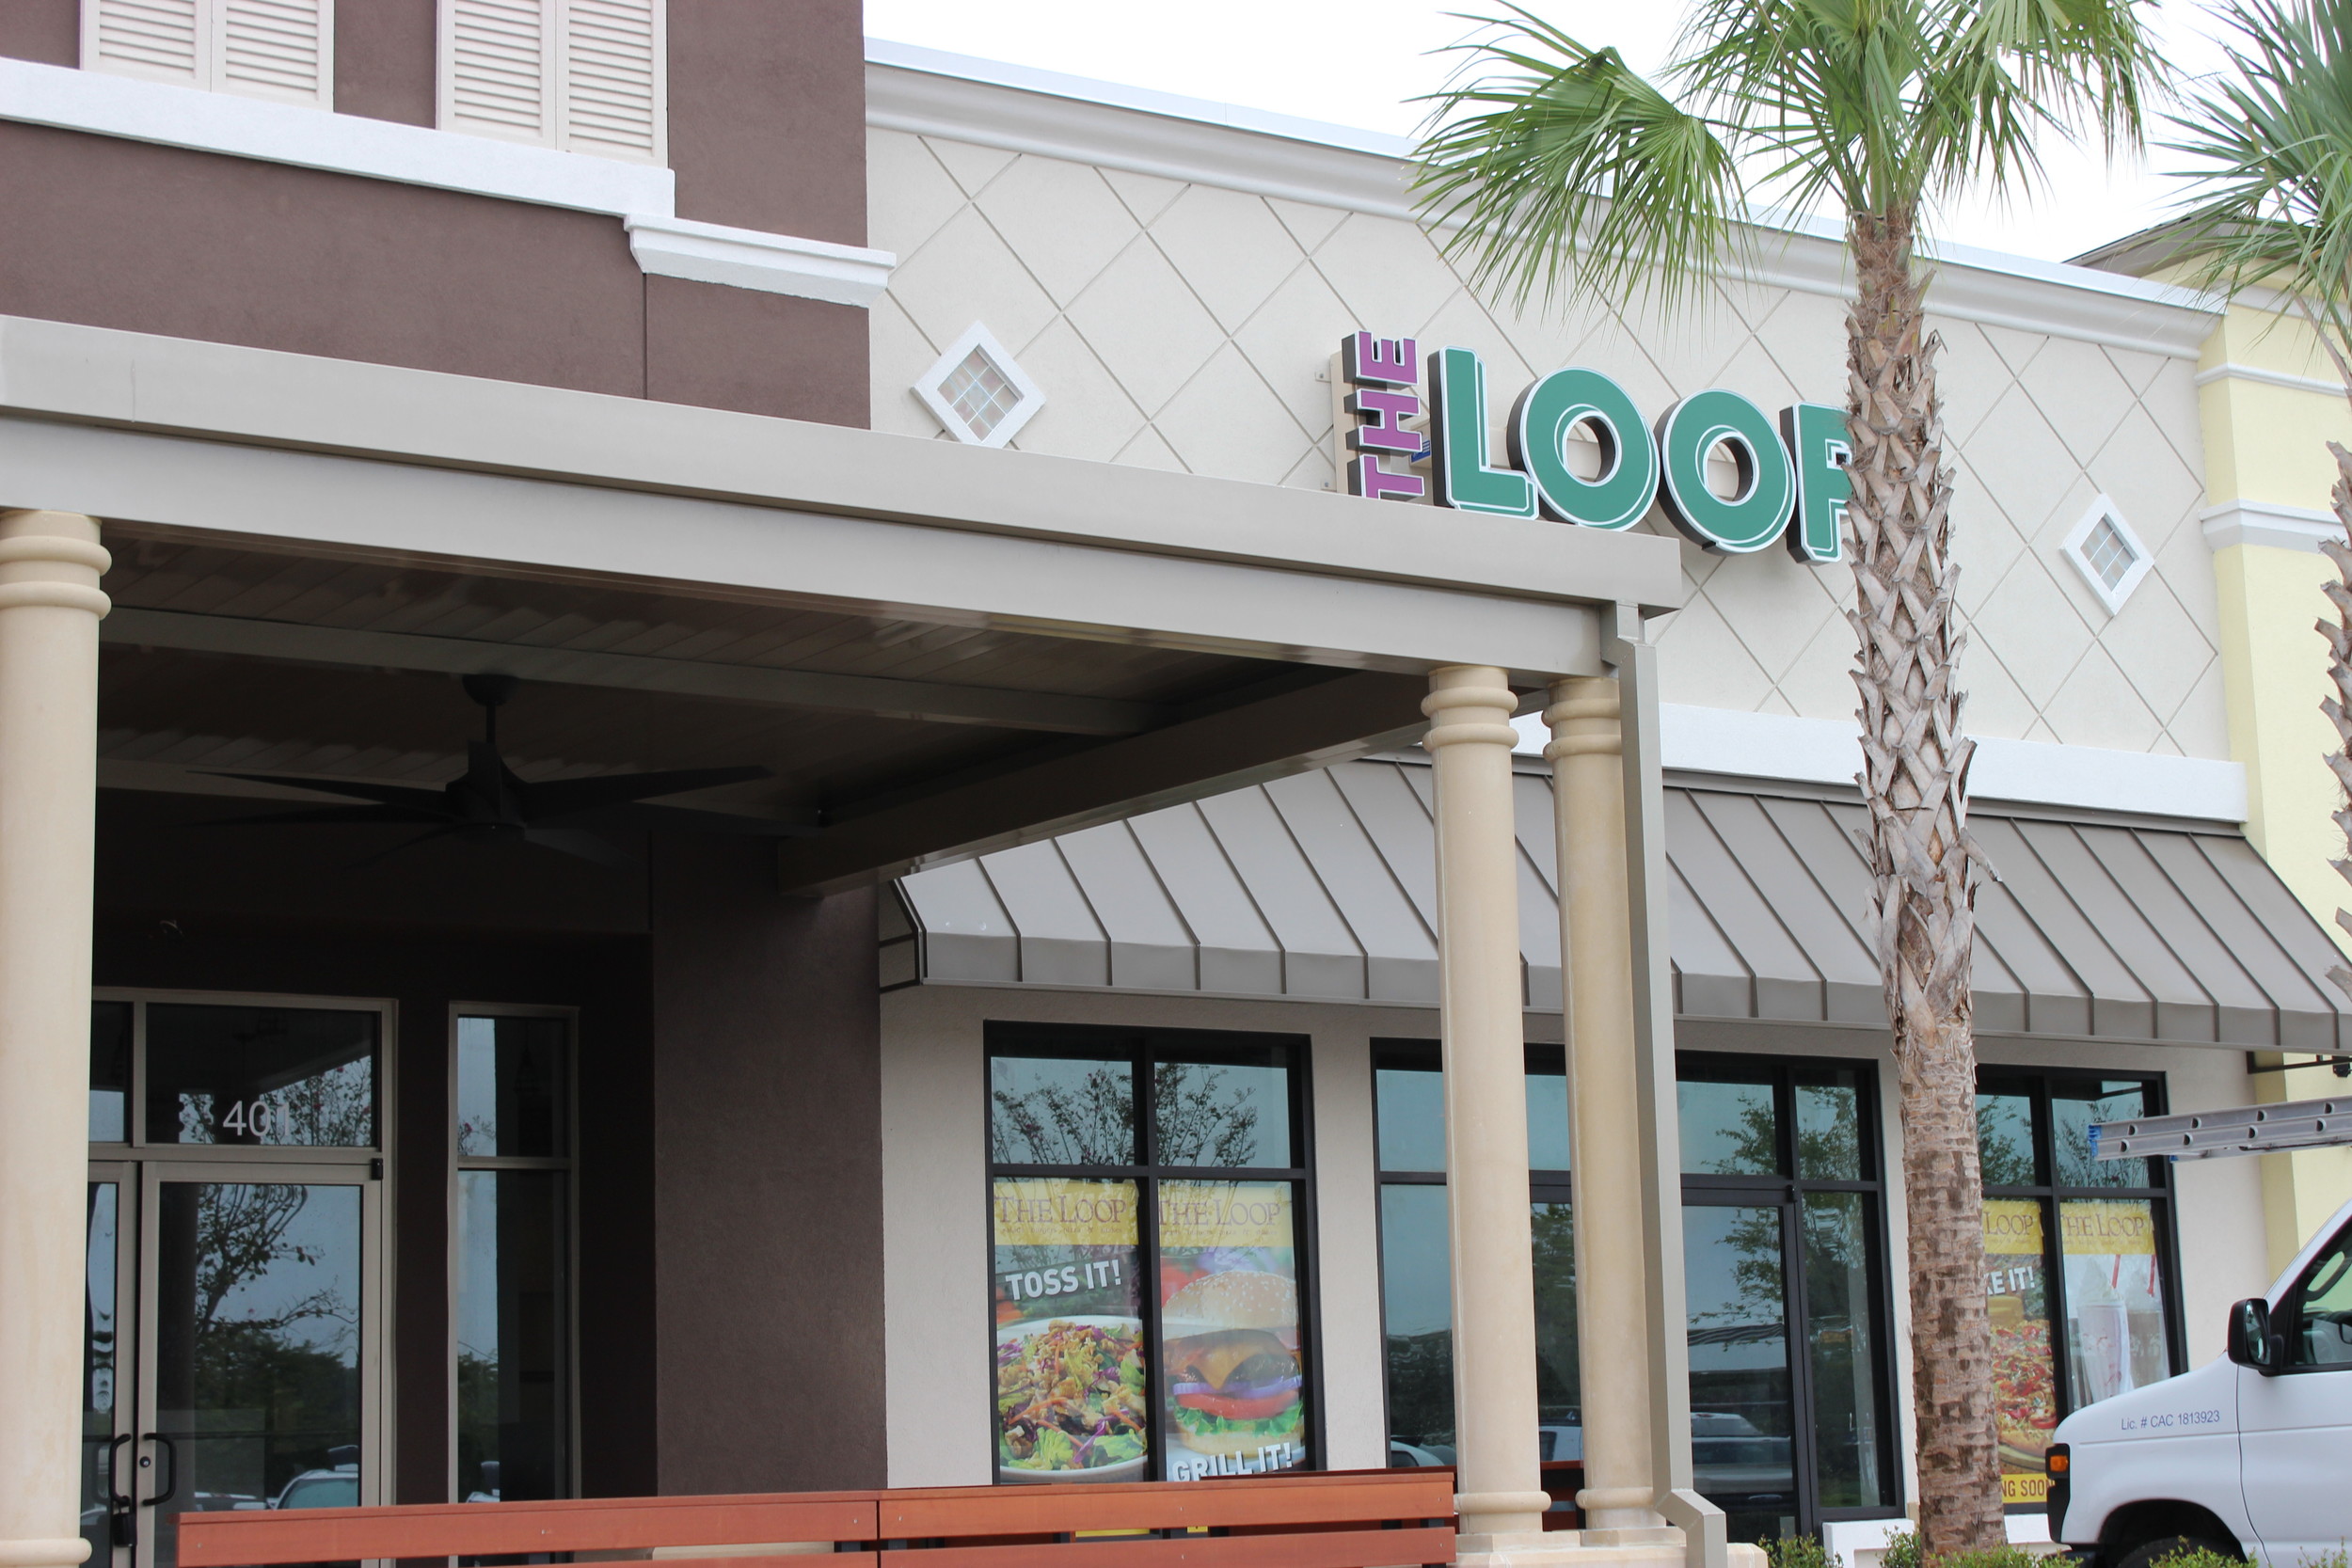 New businesses slated to open this month in Nocatee include the VyStar Credit Union and Loop Pizza Grill in the Nocatee town center. VyStar will open with a public ribbon cutting ceremony on Tues. Oct. 13 at 10 a.m. According to their Facebook page, the Loop will open in Nocatee in mid-October.